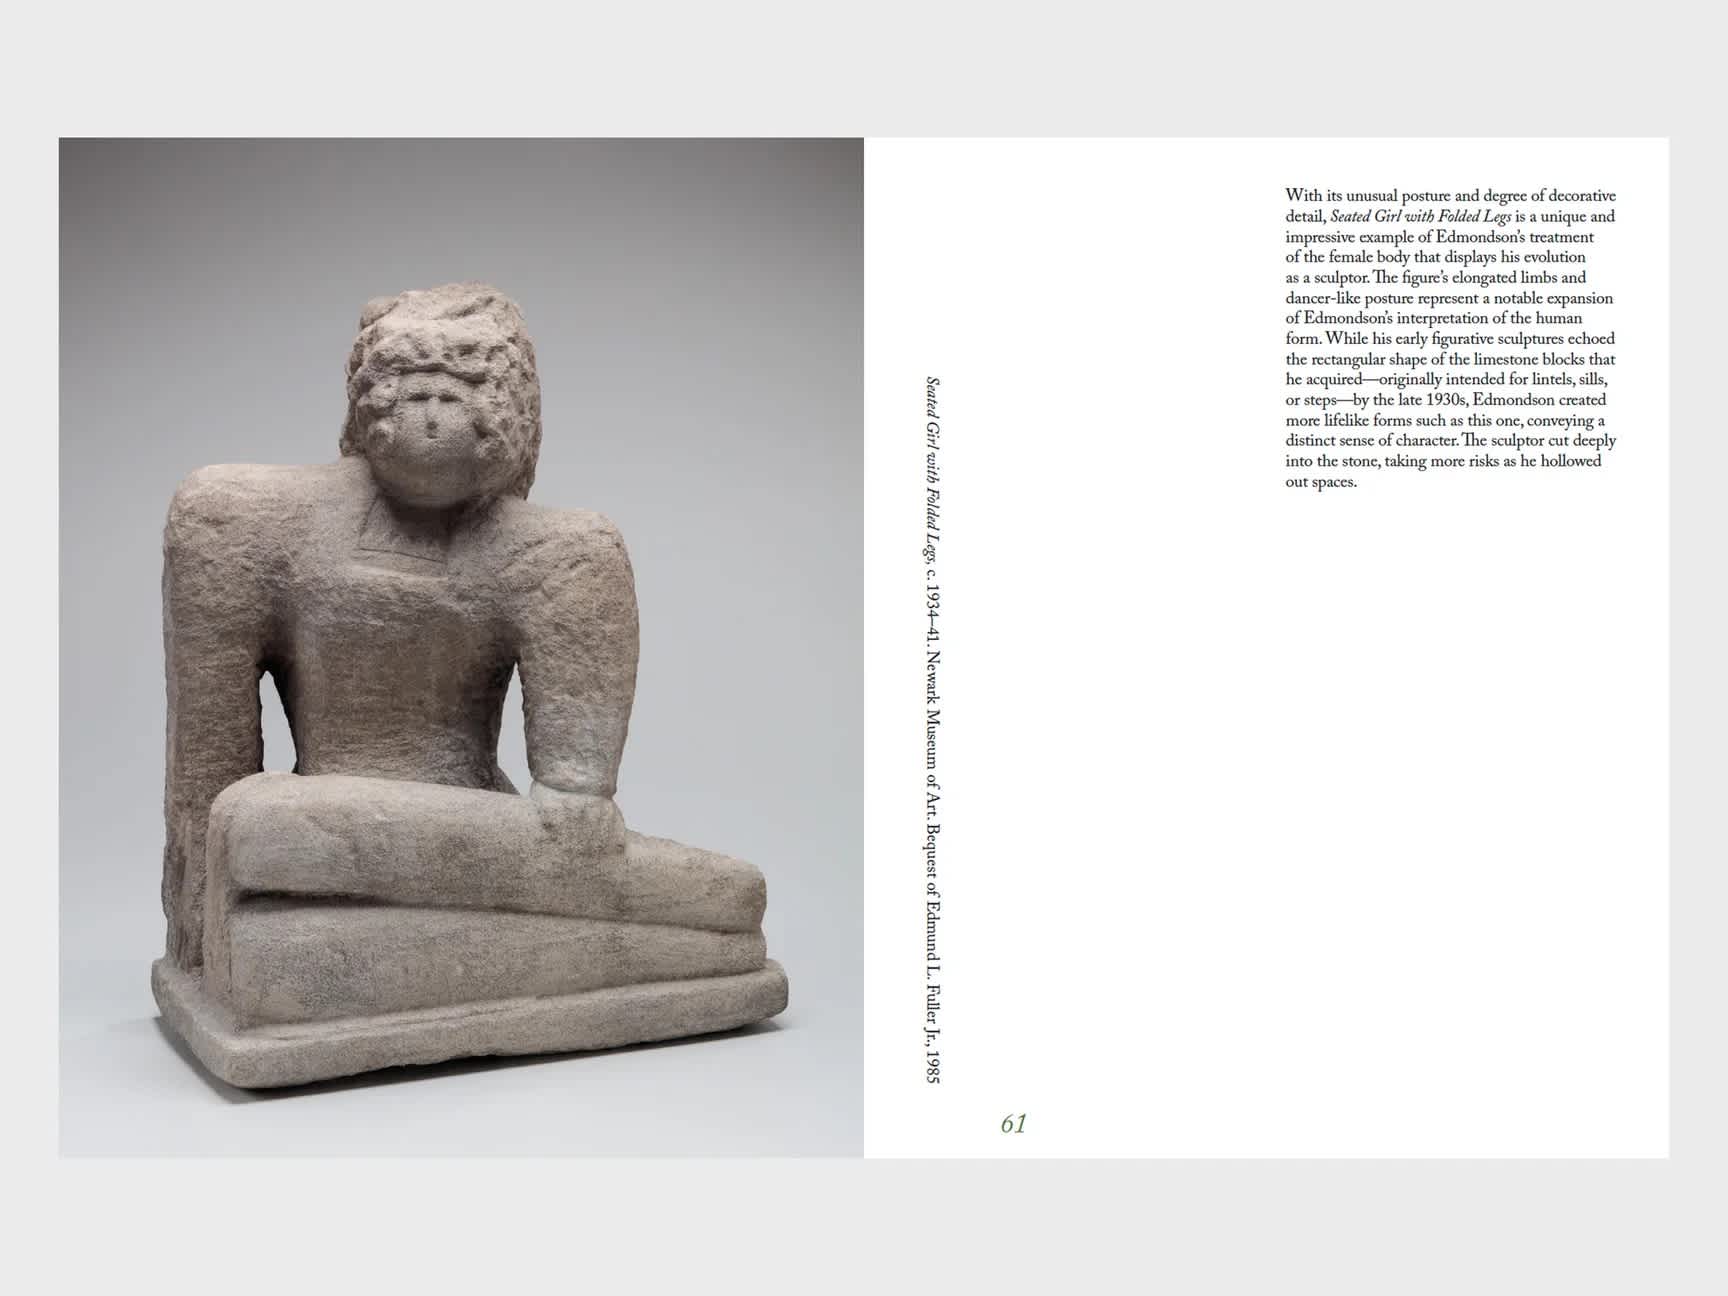 Two page book spread with a full bleed image of a person carved in stone on the left and a description of the carving on the right.